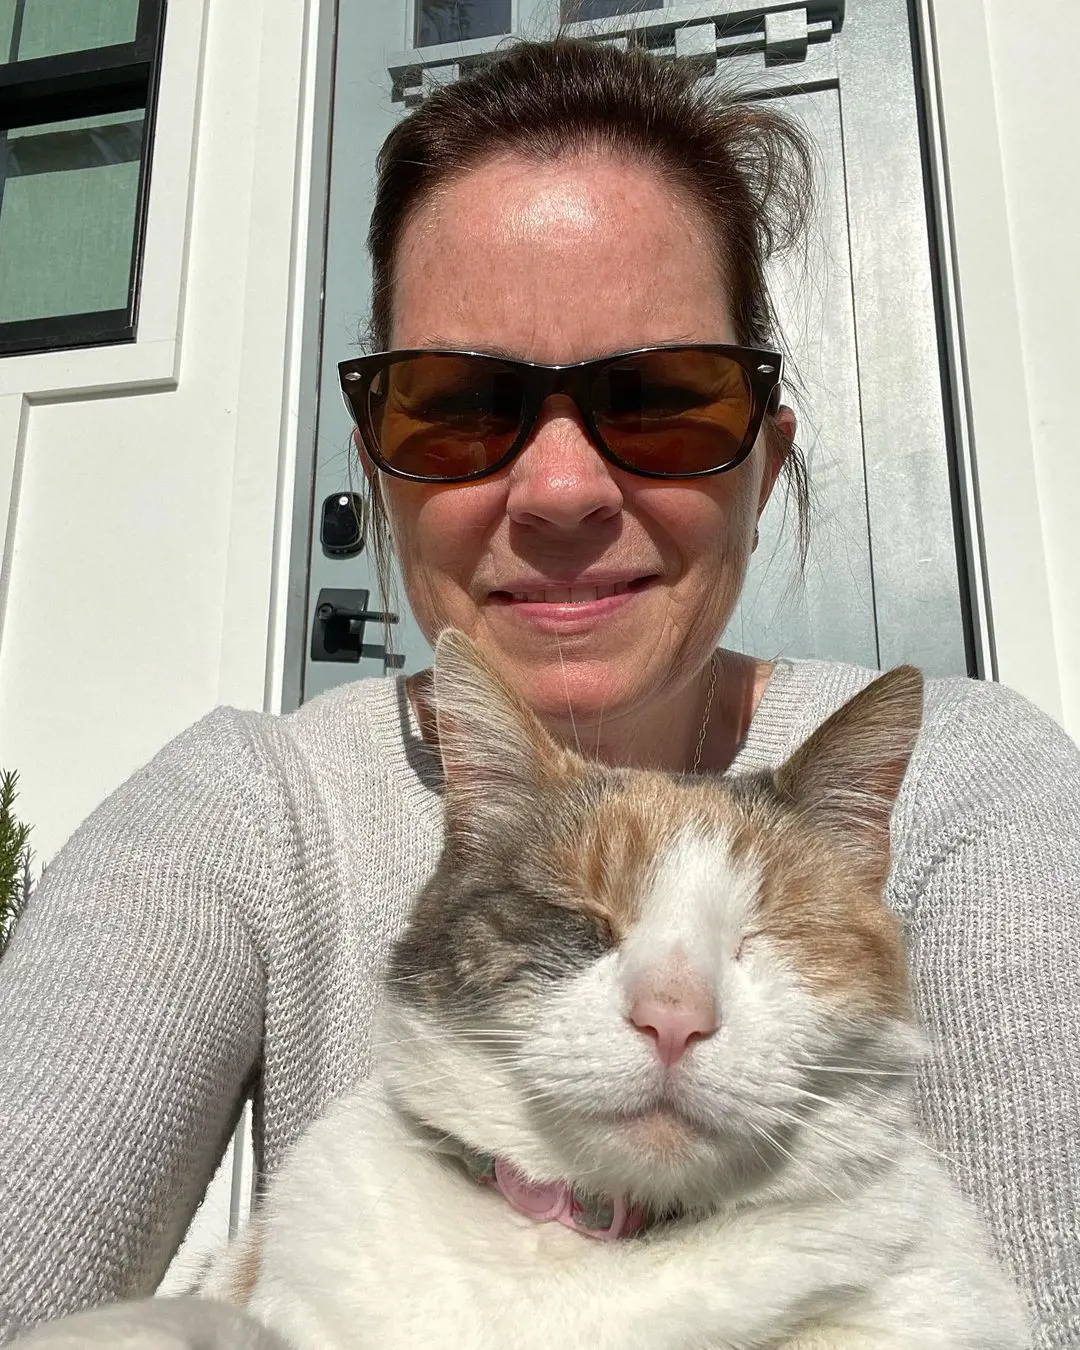 LeeAnn Took A Selfie While Sunbathing With Her Cat On 15 April 2023